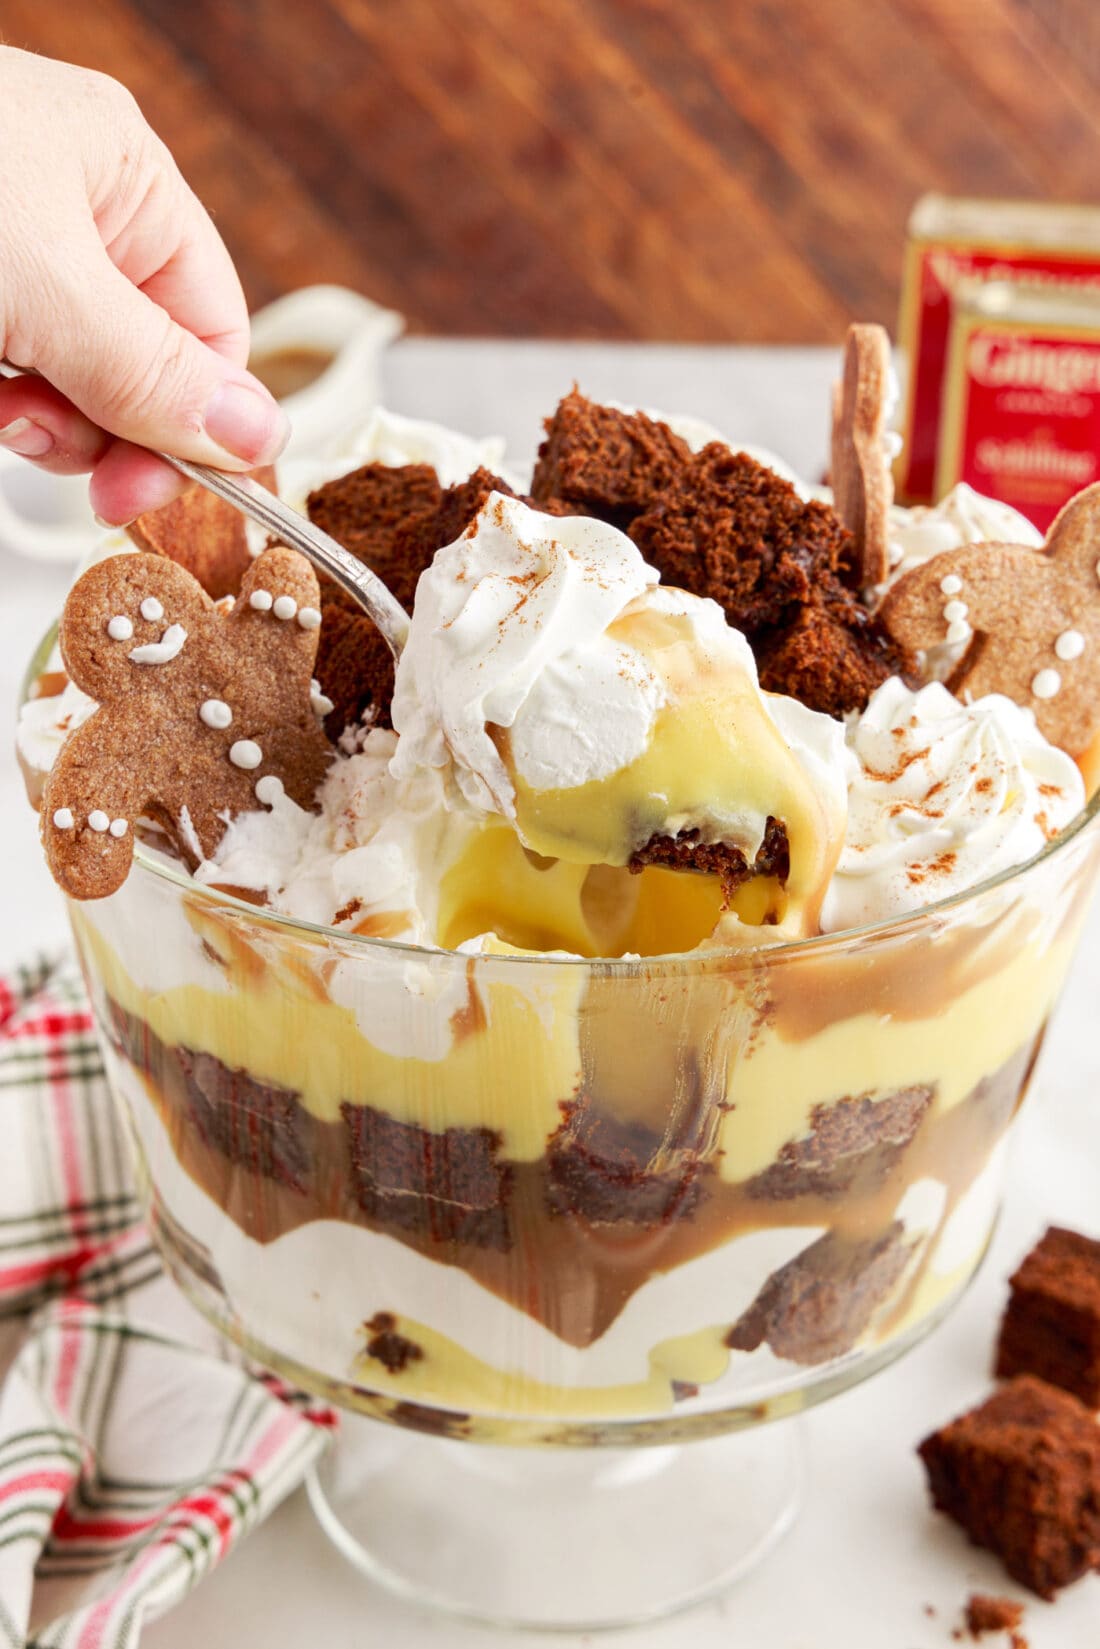 Spoonful of Gingerbread Trifle being lifted out of the trifle bowl